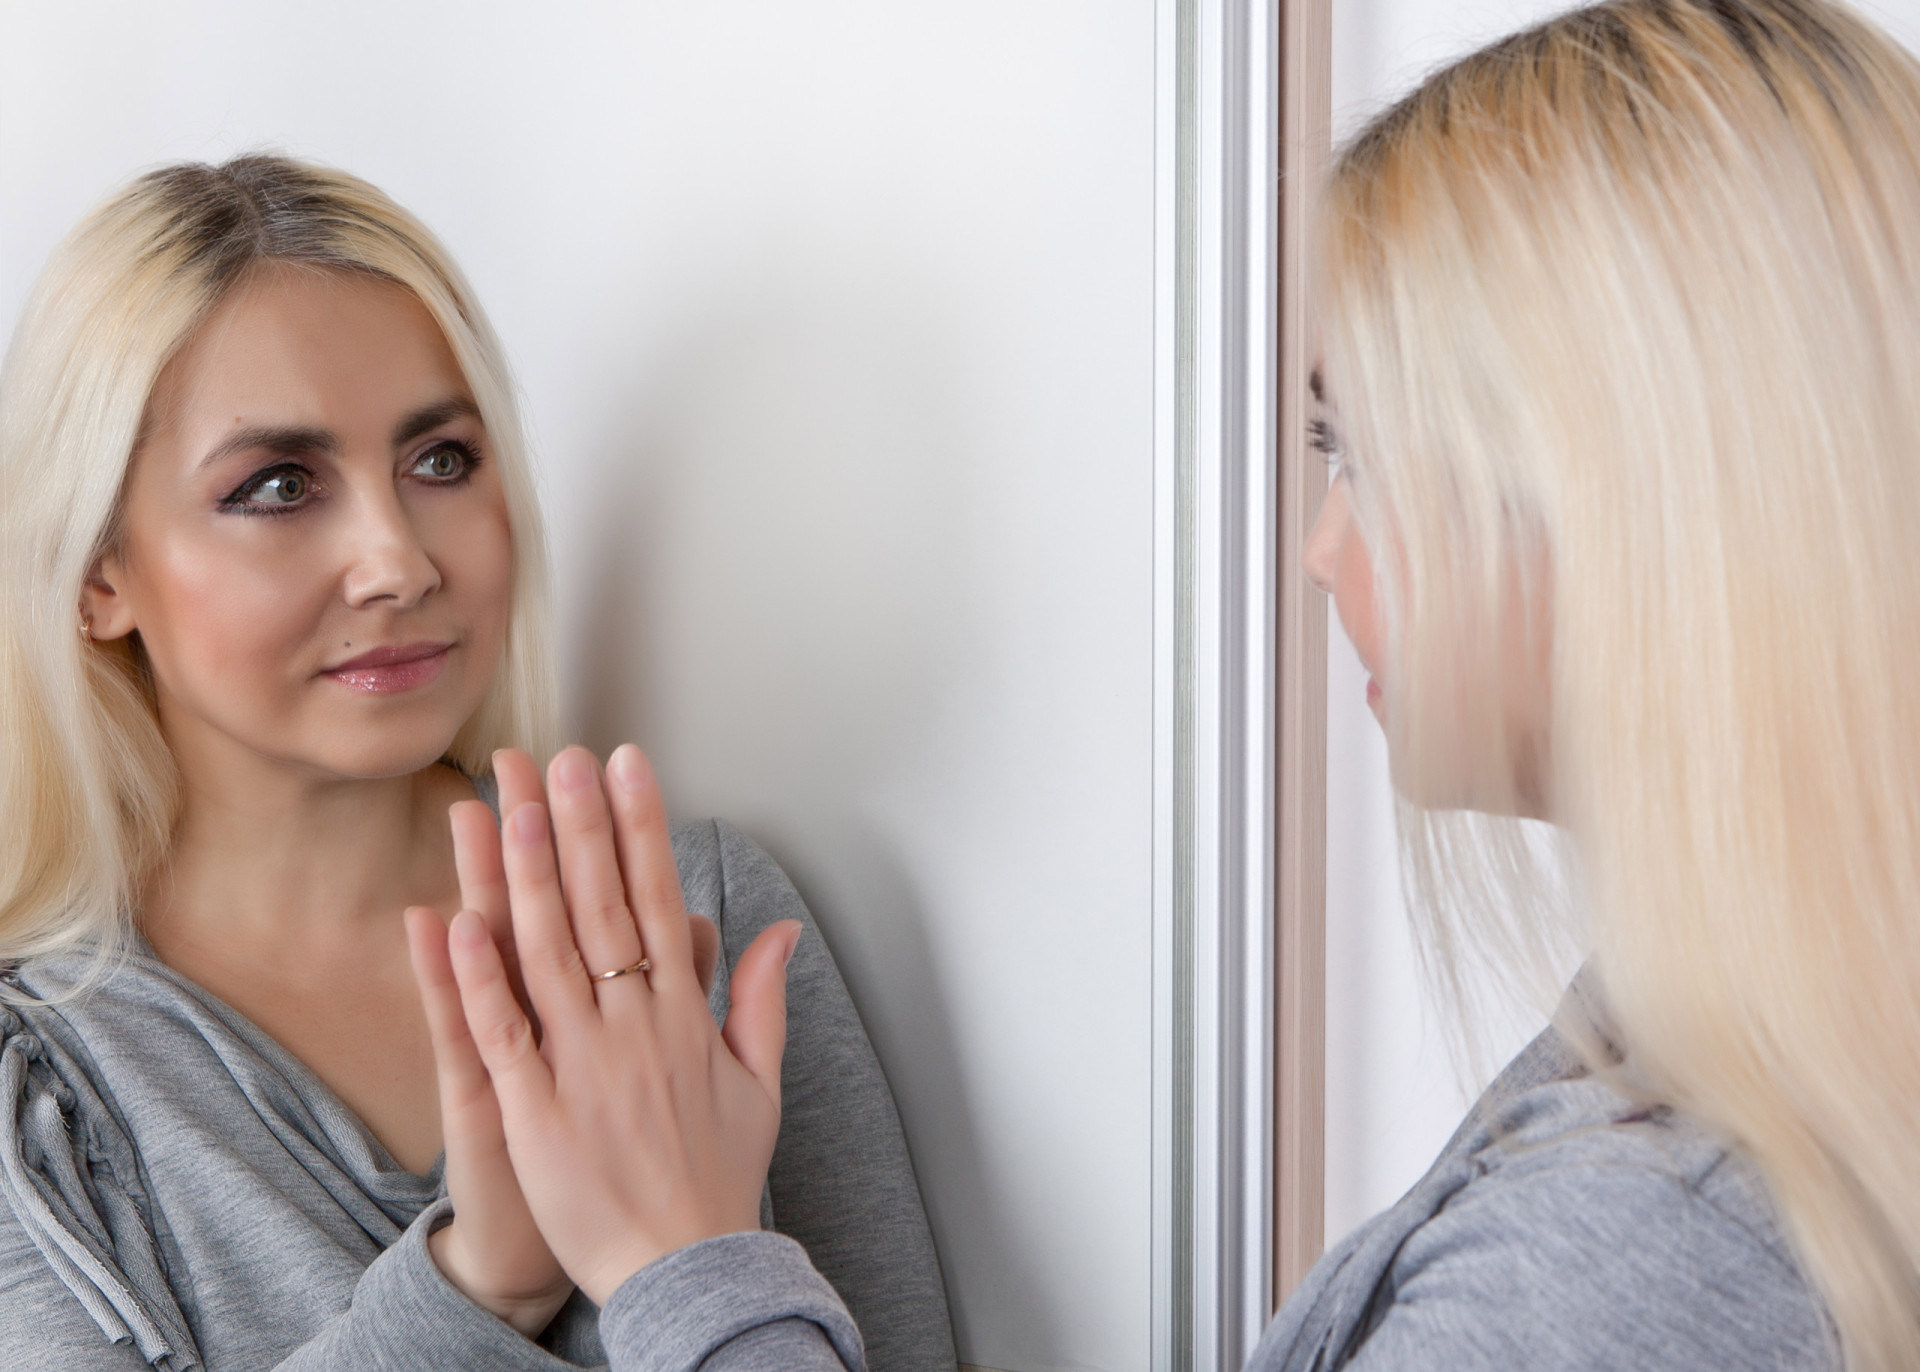 Do you talk to yourself? Here's what science says about it